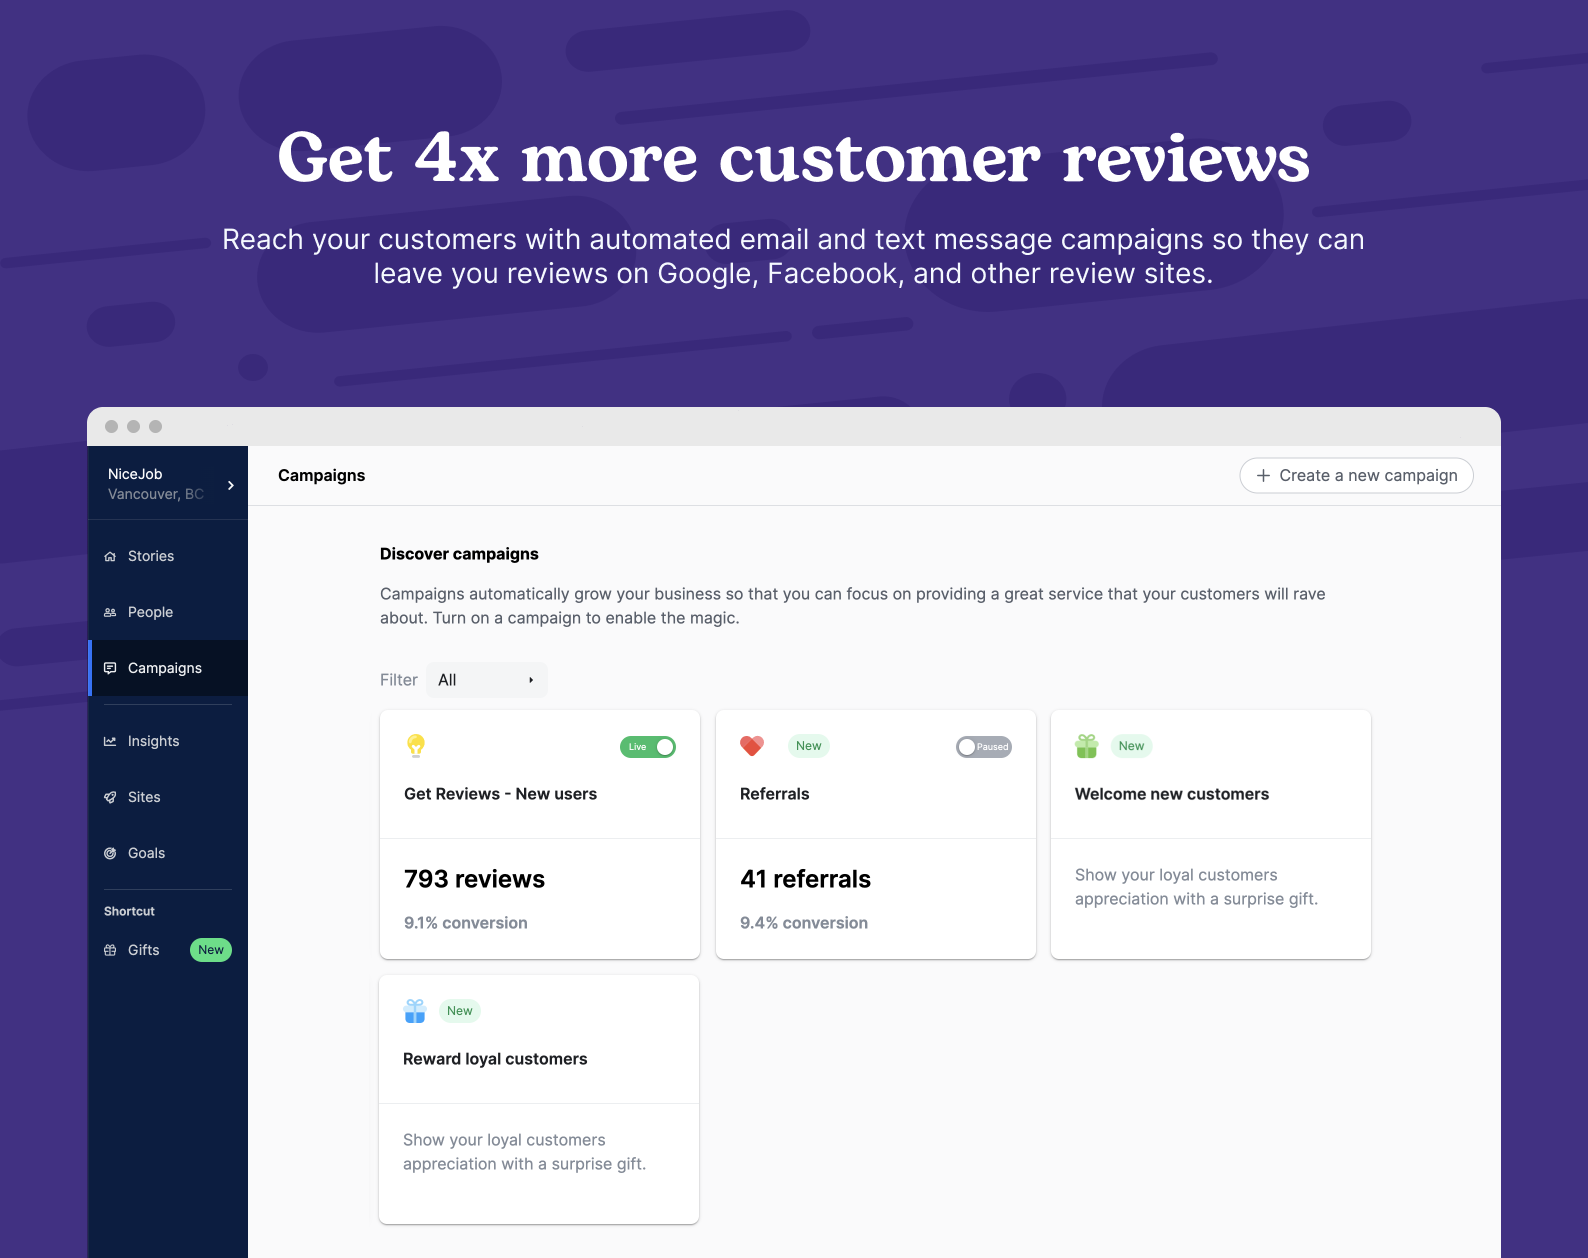 Get 4x more customer reviews for your business